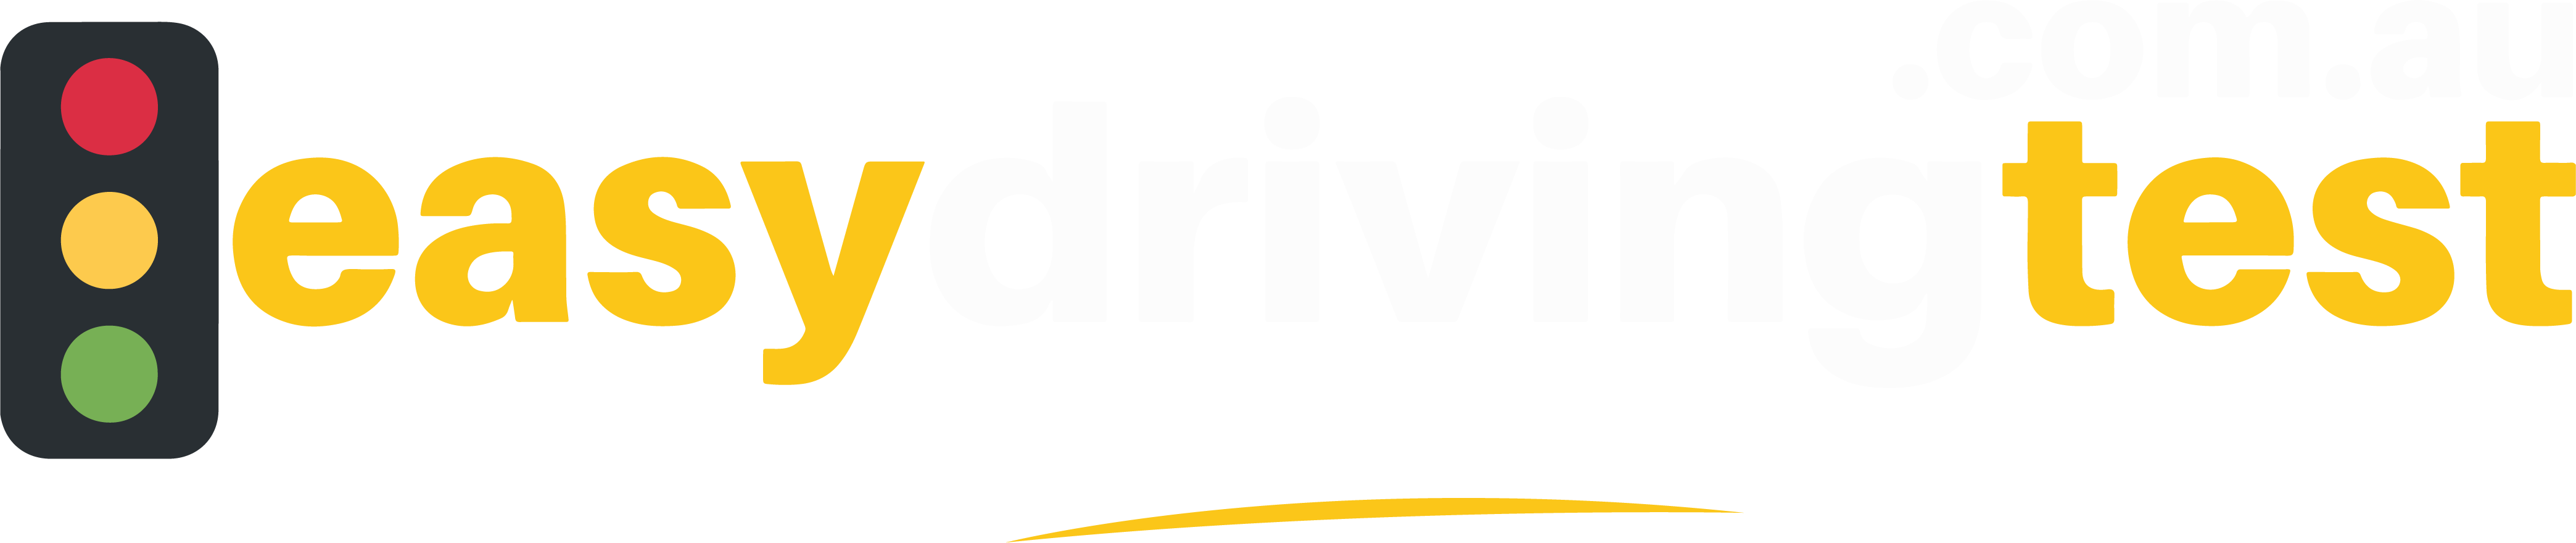 FREE Learner's Test and Driving Test Practice